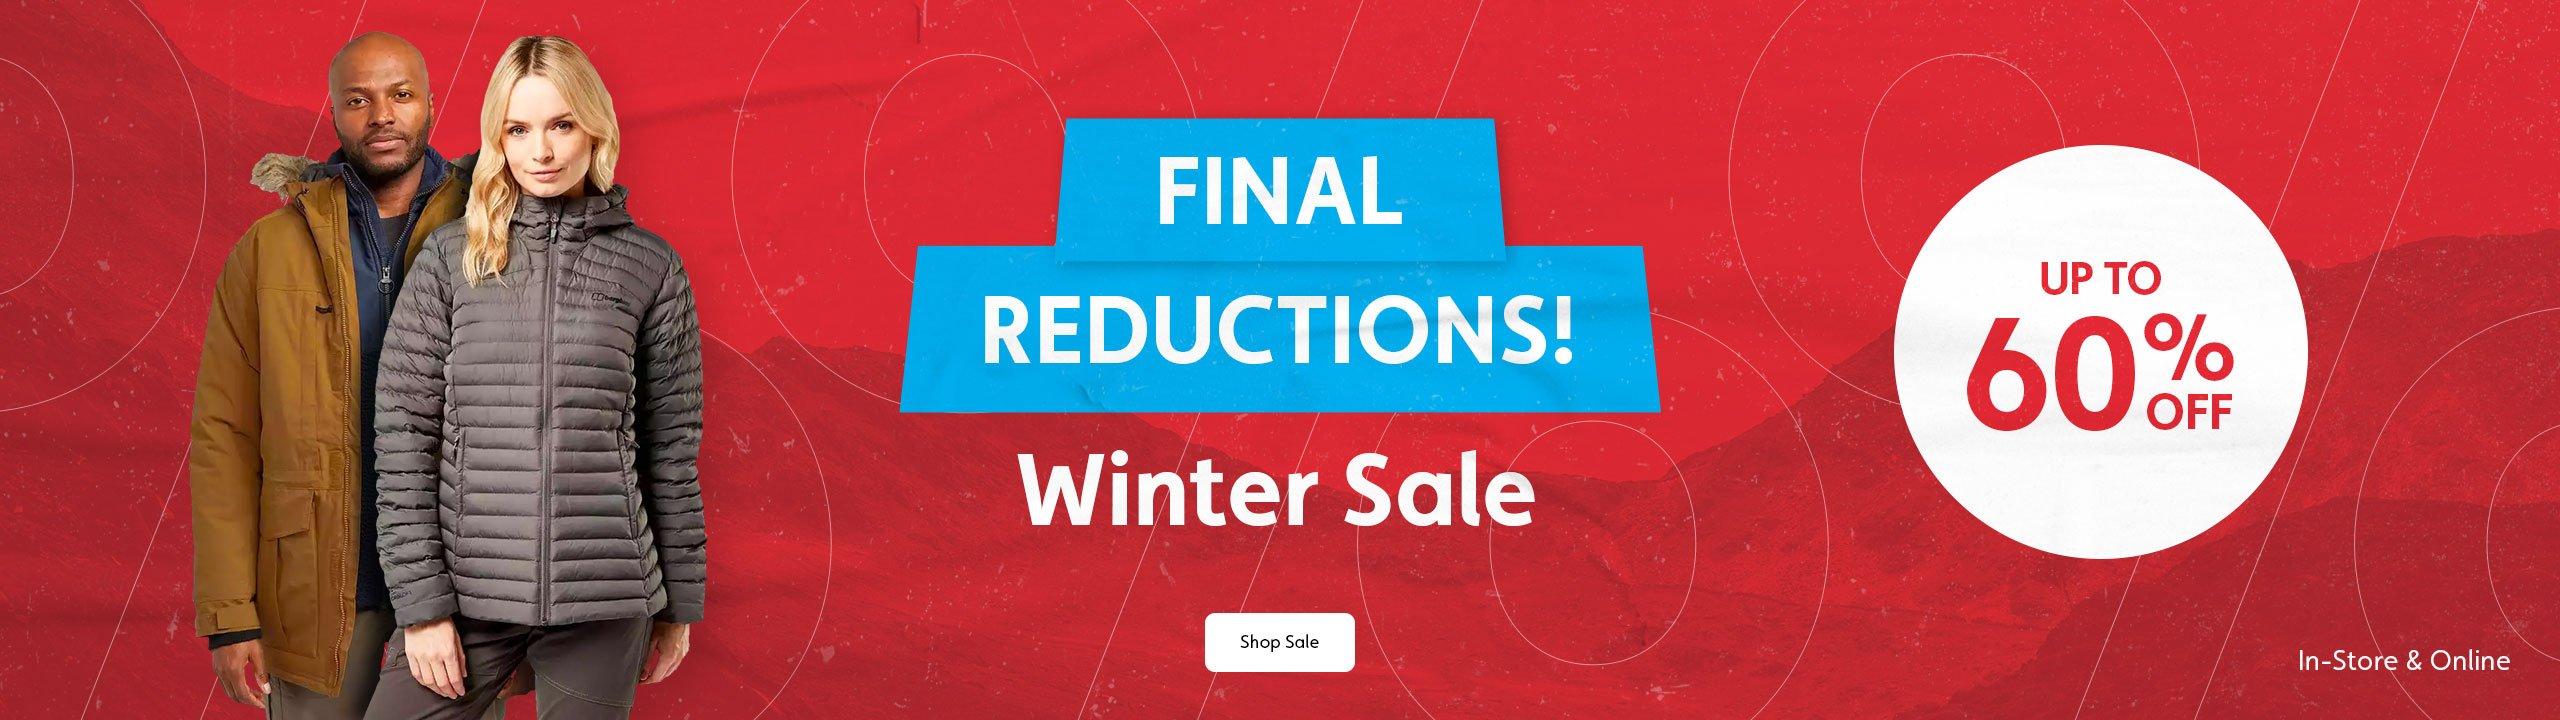 Winter Sale – Up to 60% Off - Final  Reductions!